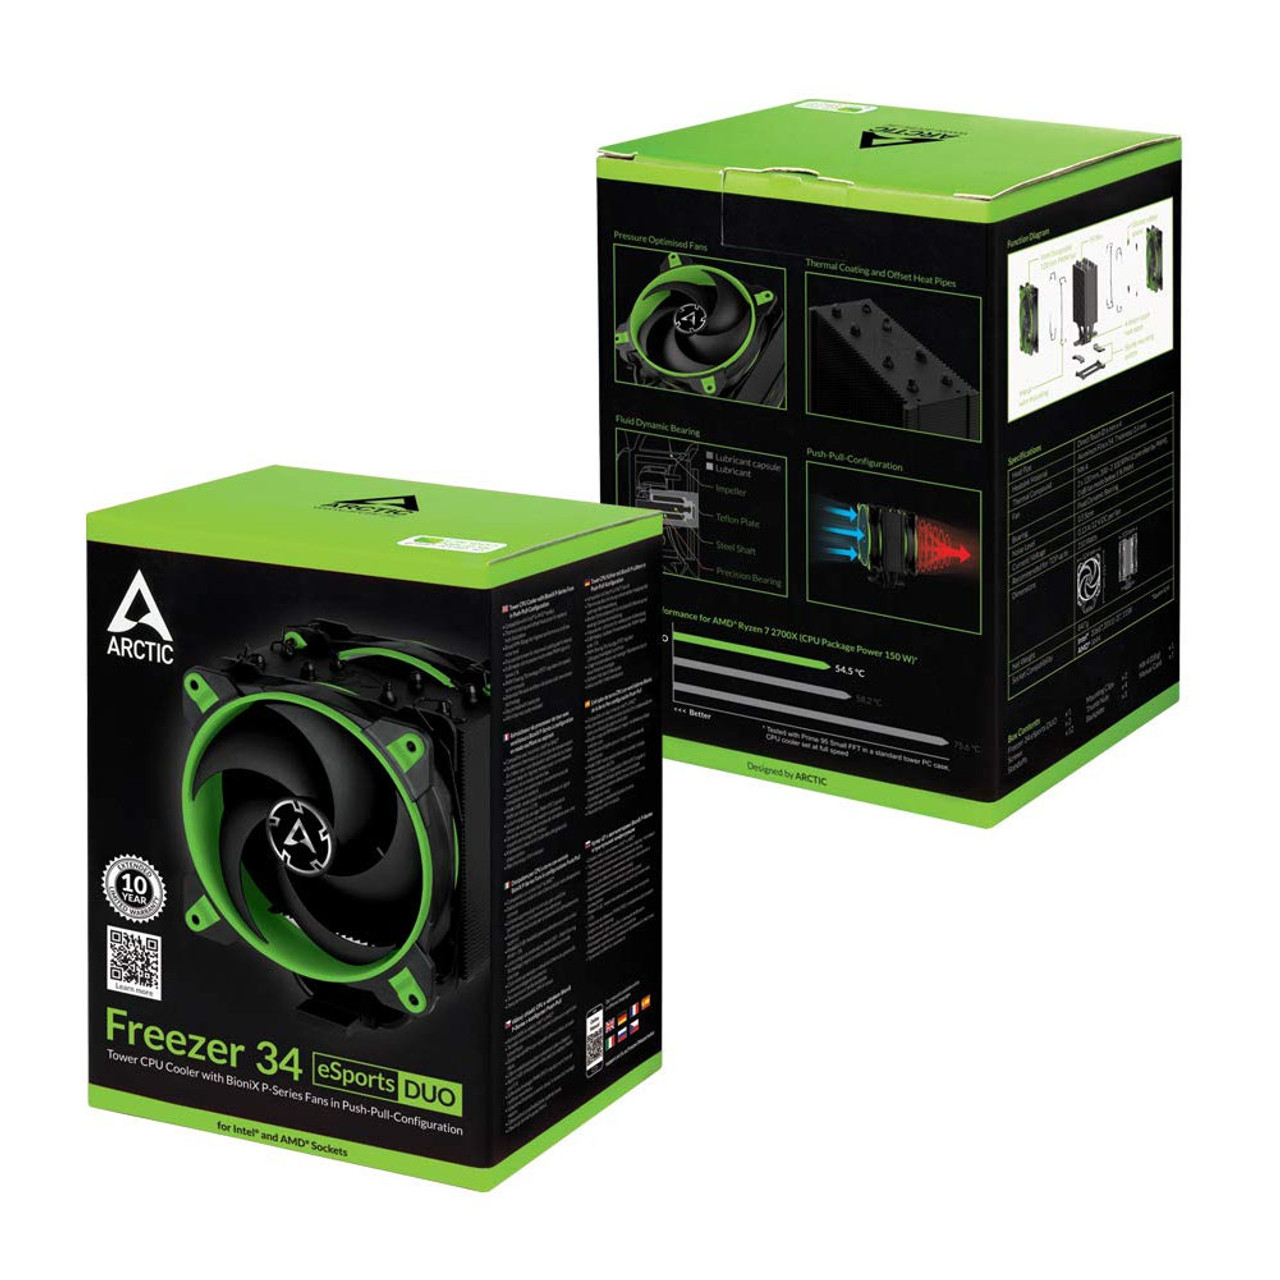 Arctic ACFRE00063A Freezer 34 eSports DUO Edition 120mm Tower CPU Cooler Fans Green